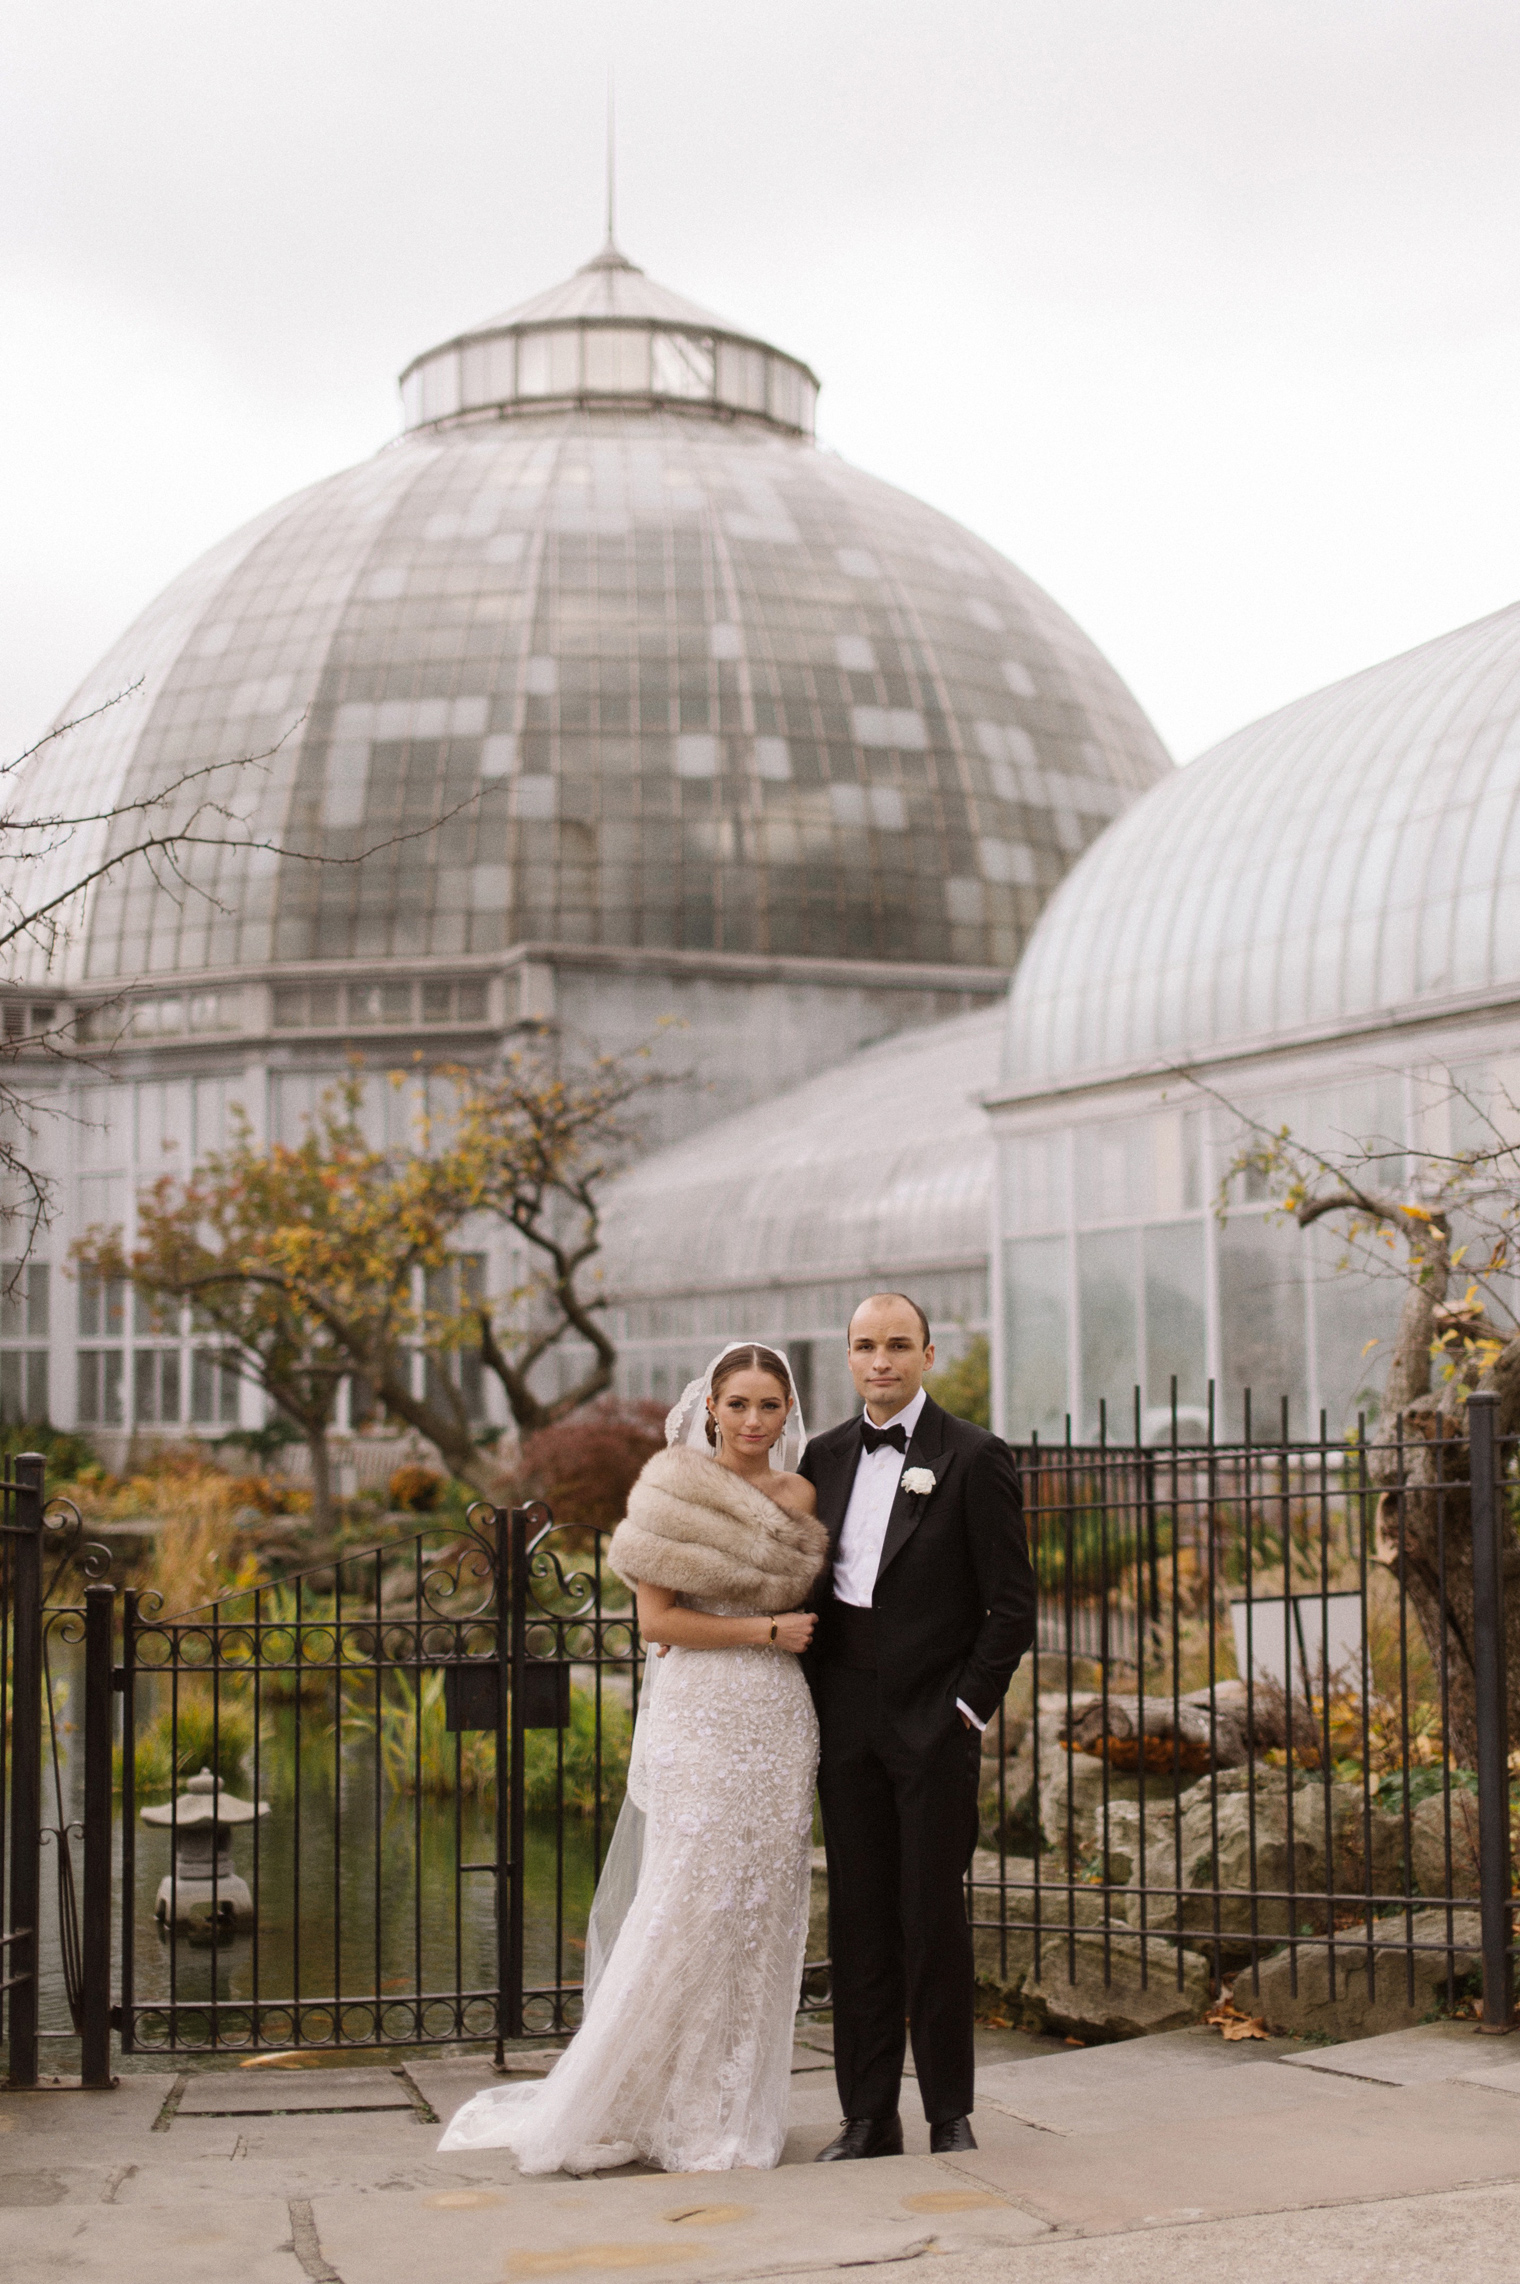 Bride and groom pose for wedding portraits by the Conservatory on Belle Isle in Detroit.